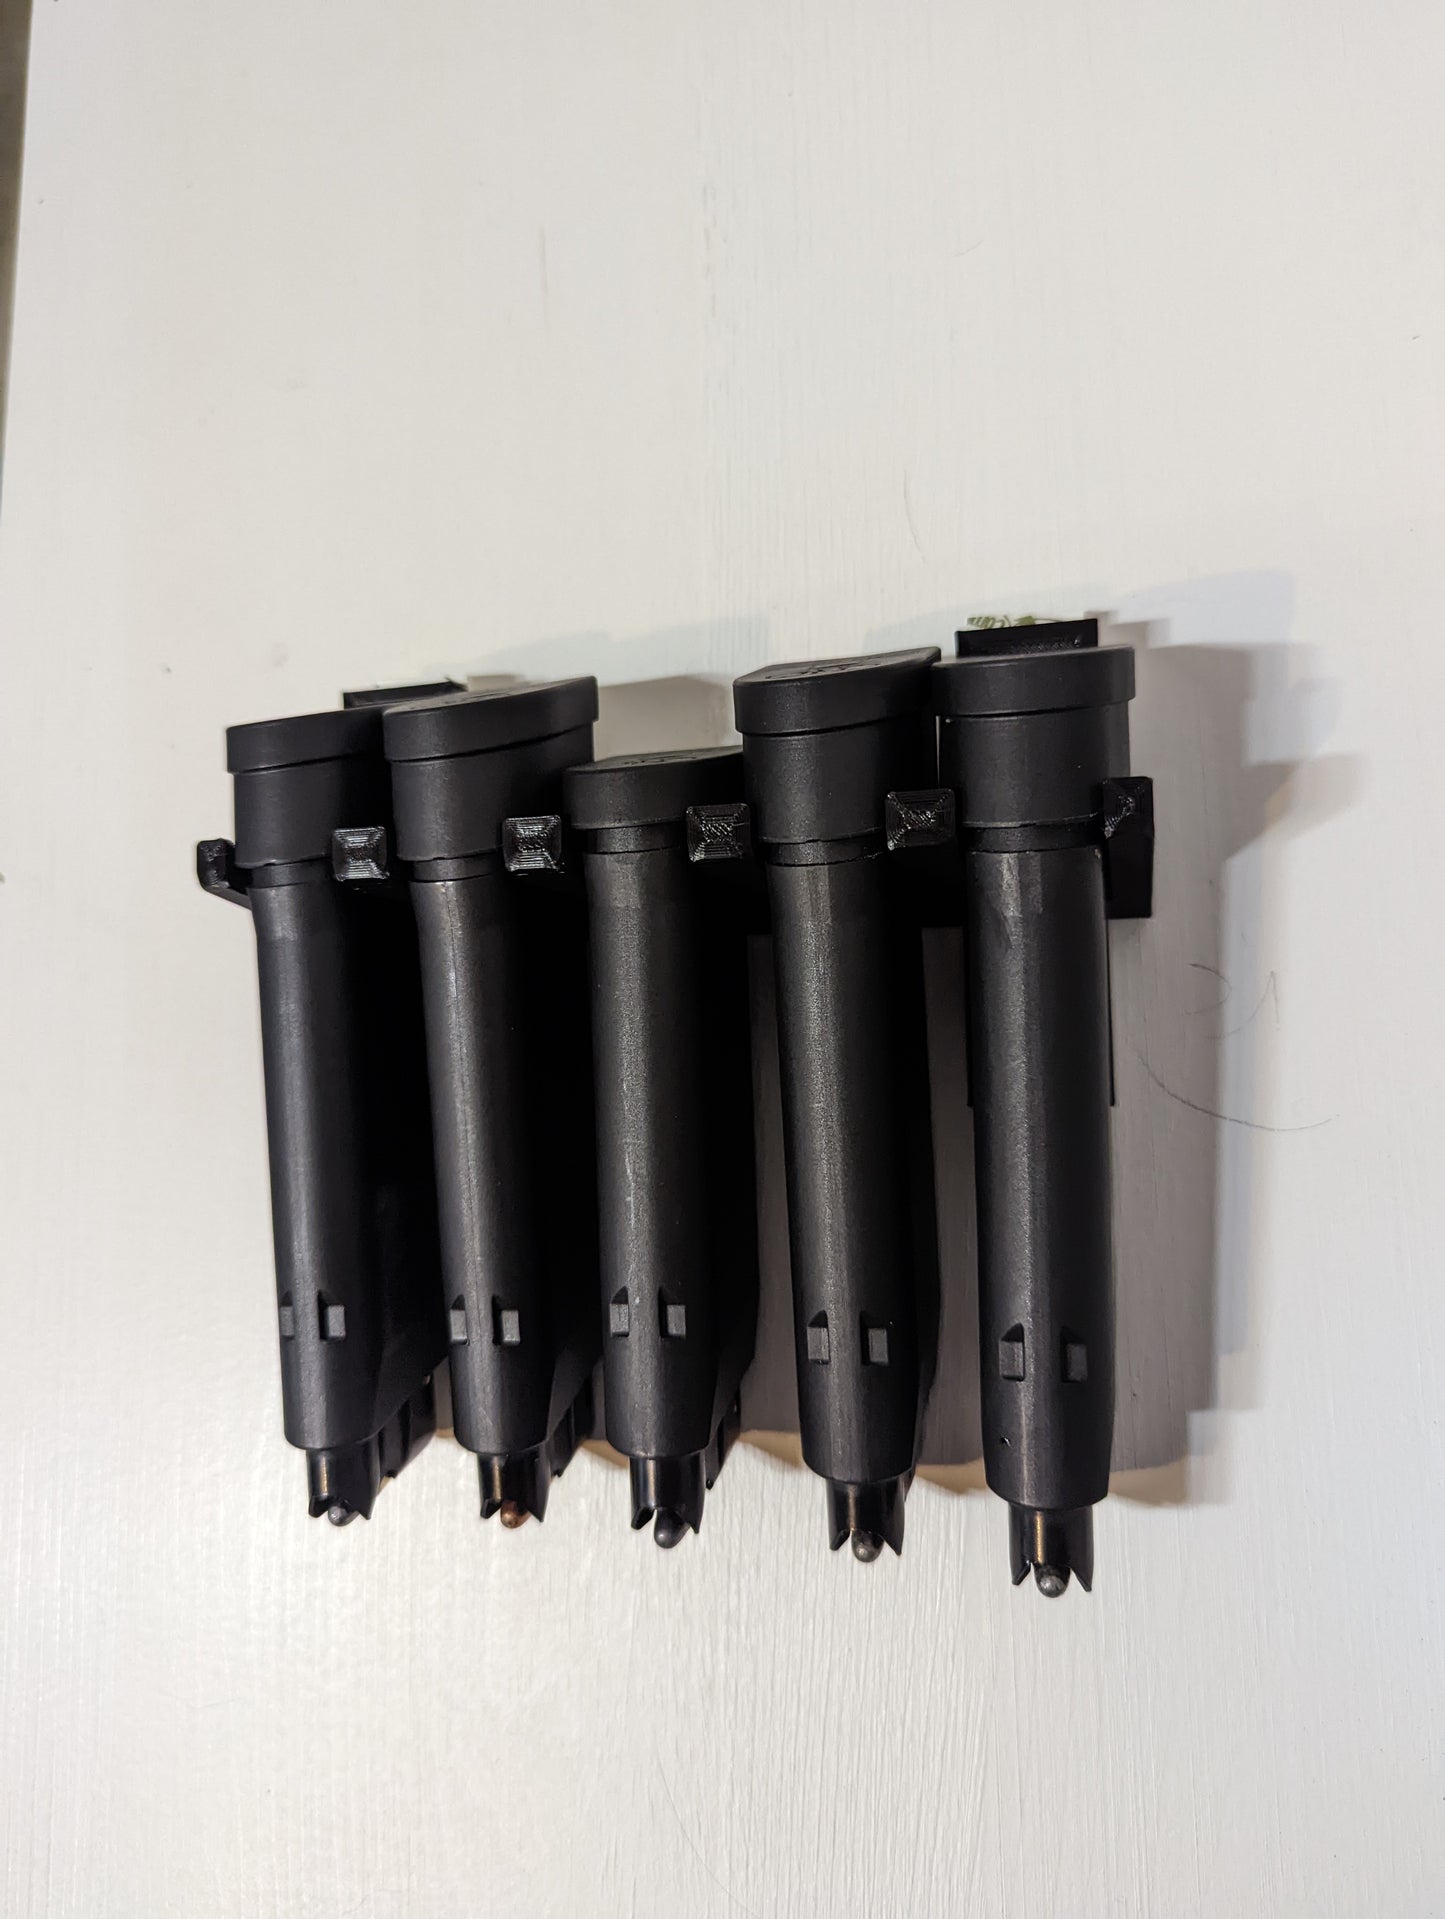 Mount for FN 502 Tactical Mags - Command Strips | Magazine Holder Storage Rack